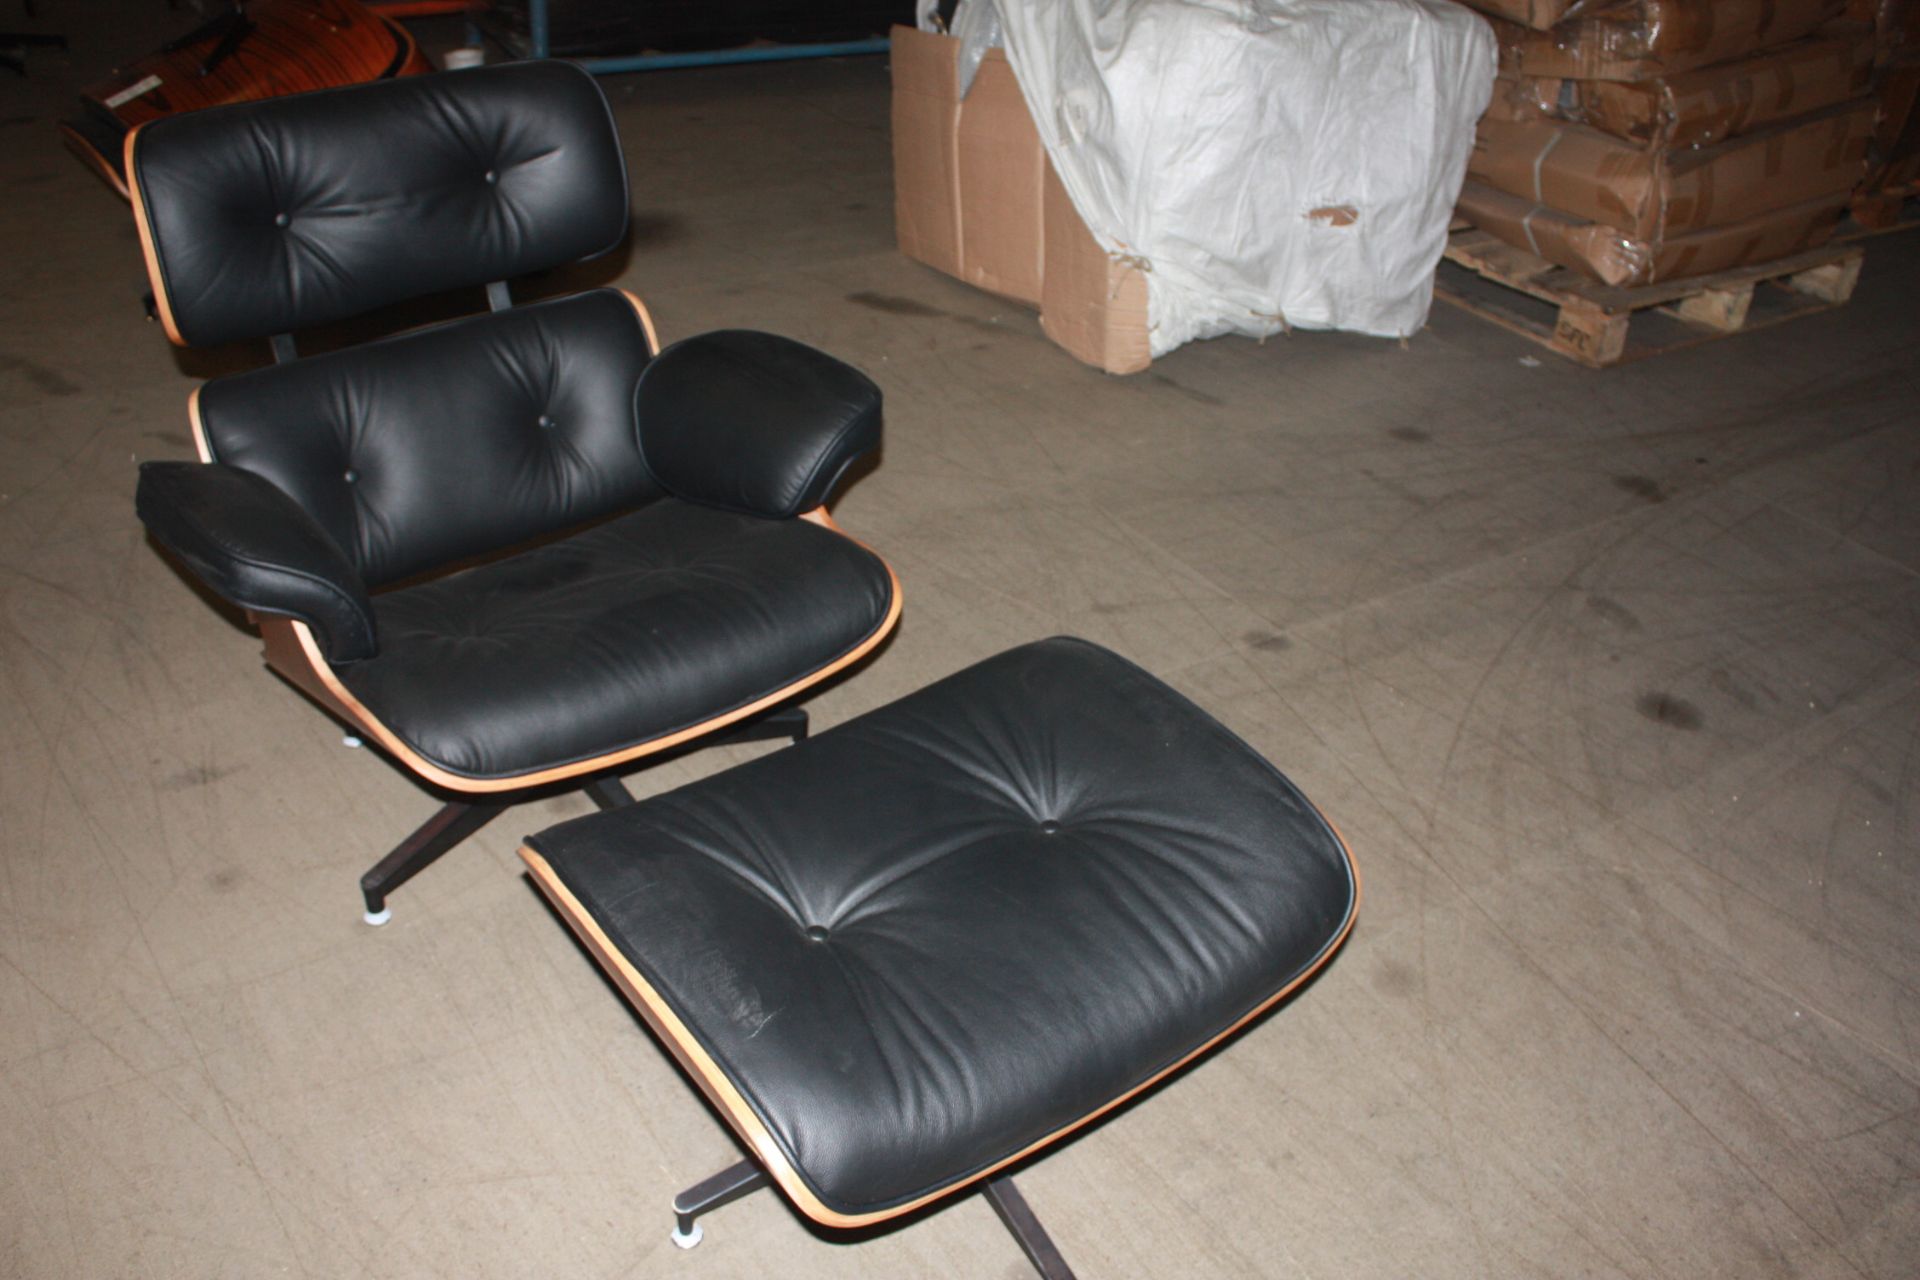 Leather Lounge Chair & Foot Stool - Image 4 of 4